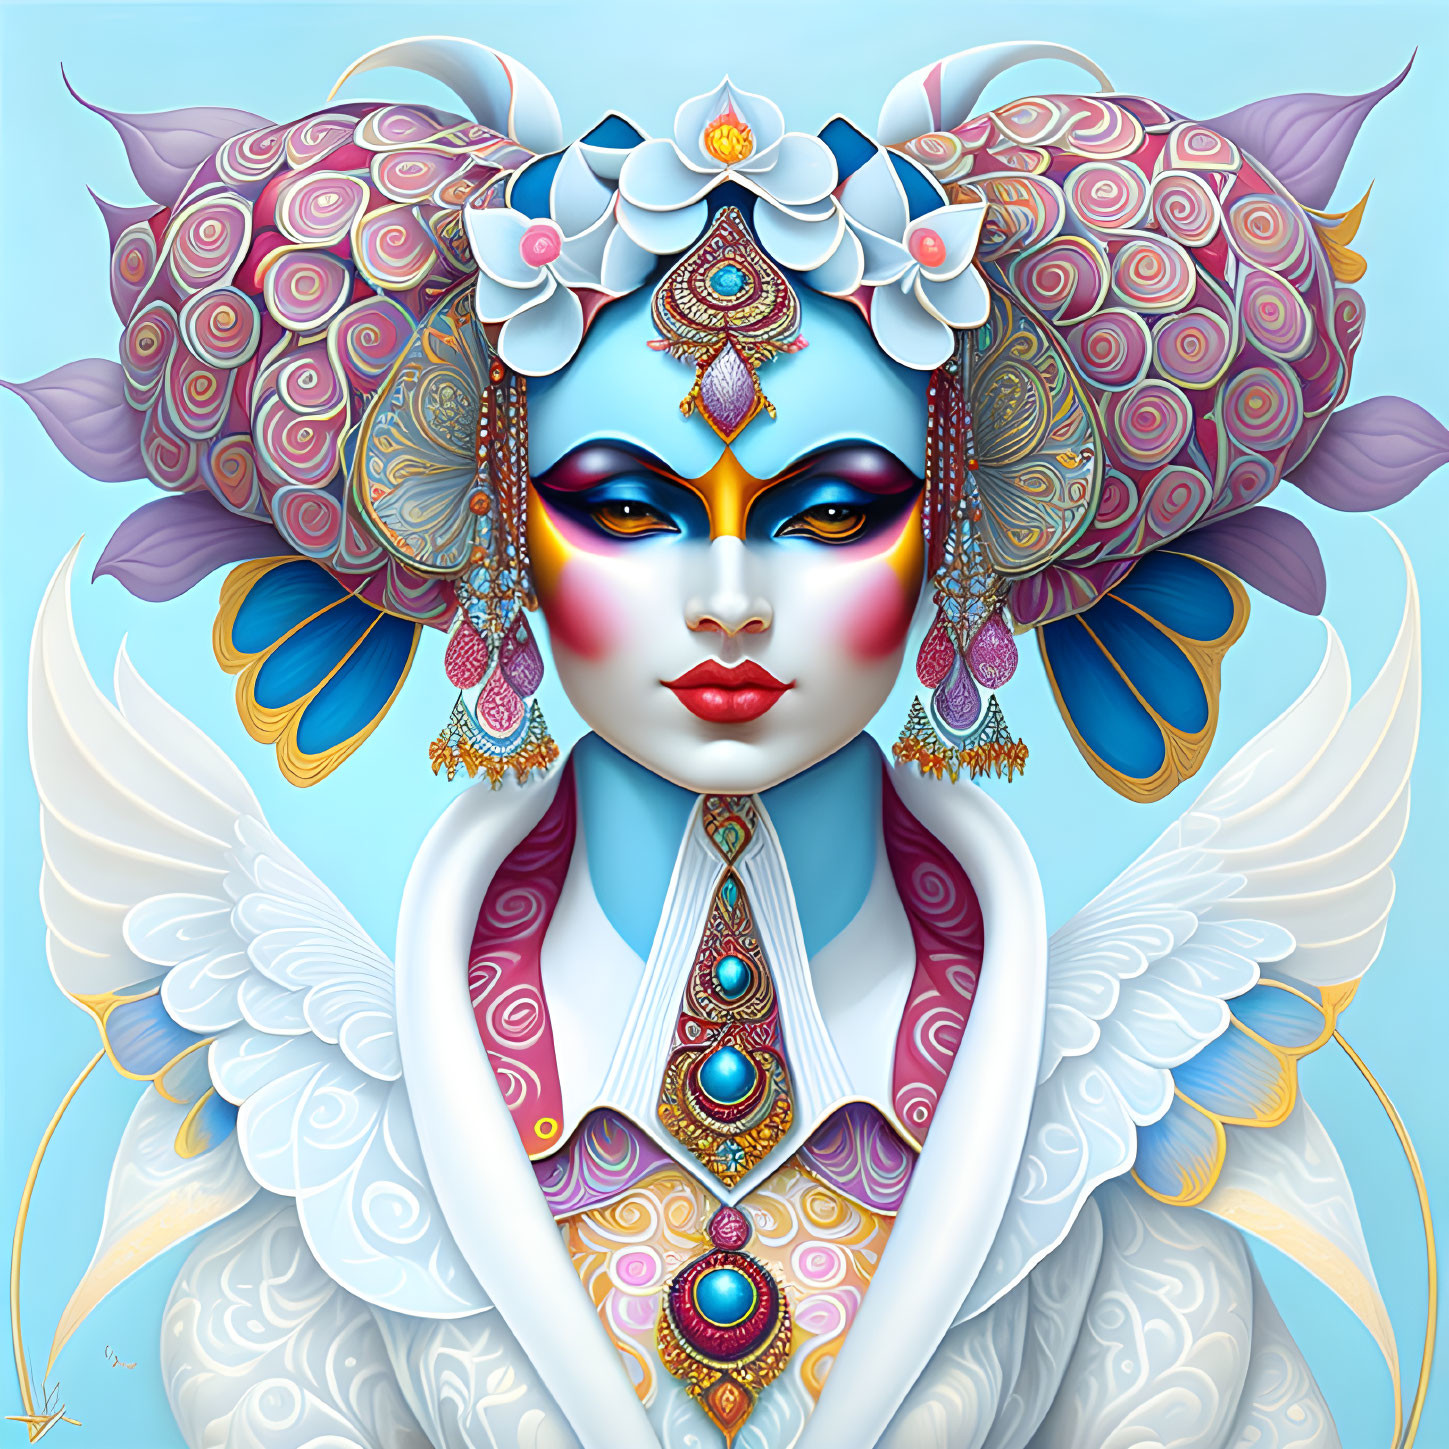 Colorful Stylized Portrait of Deity with Blue Skin and White Wings